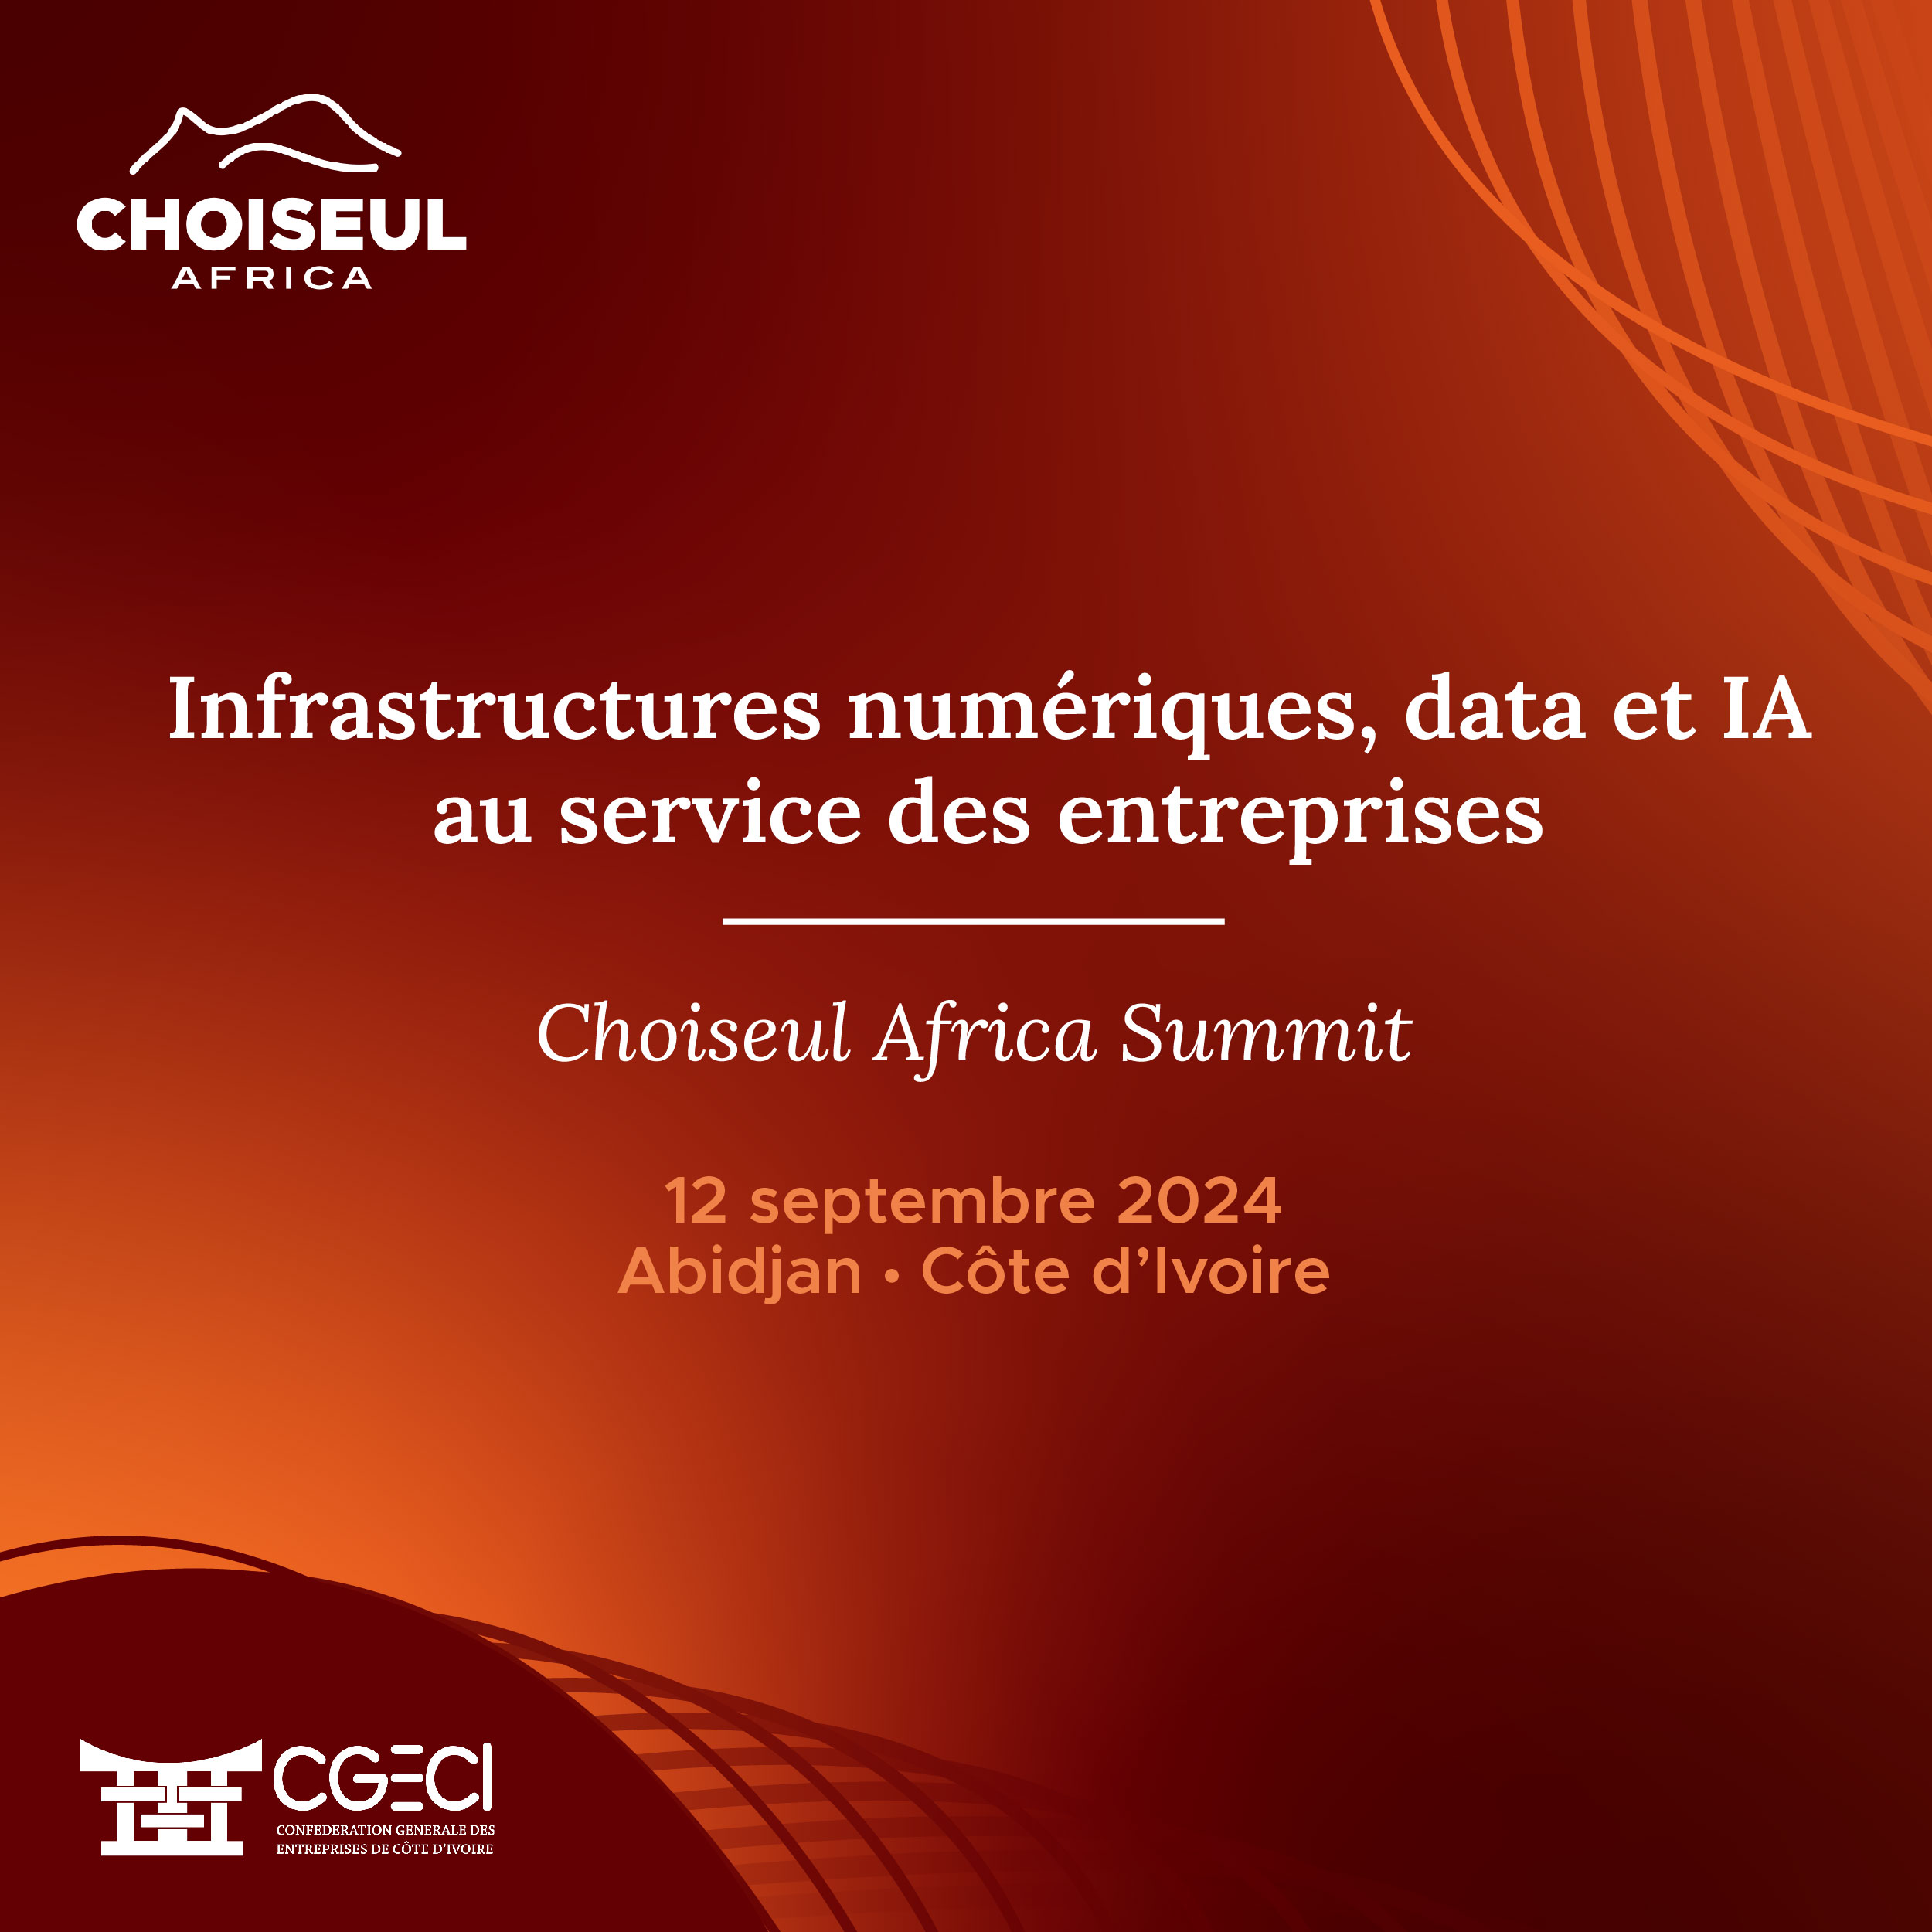 Choiseul Africa Summit | Digital Infrastructures data & AI for businesses